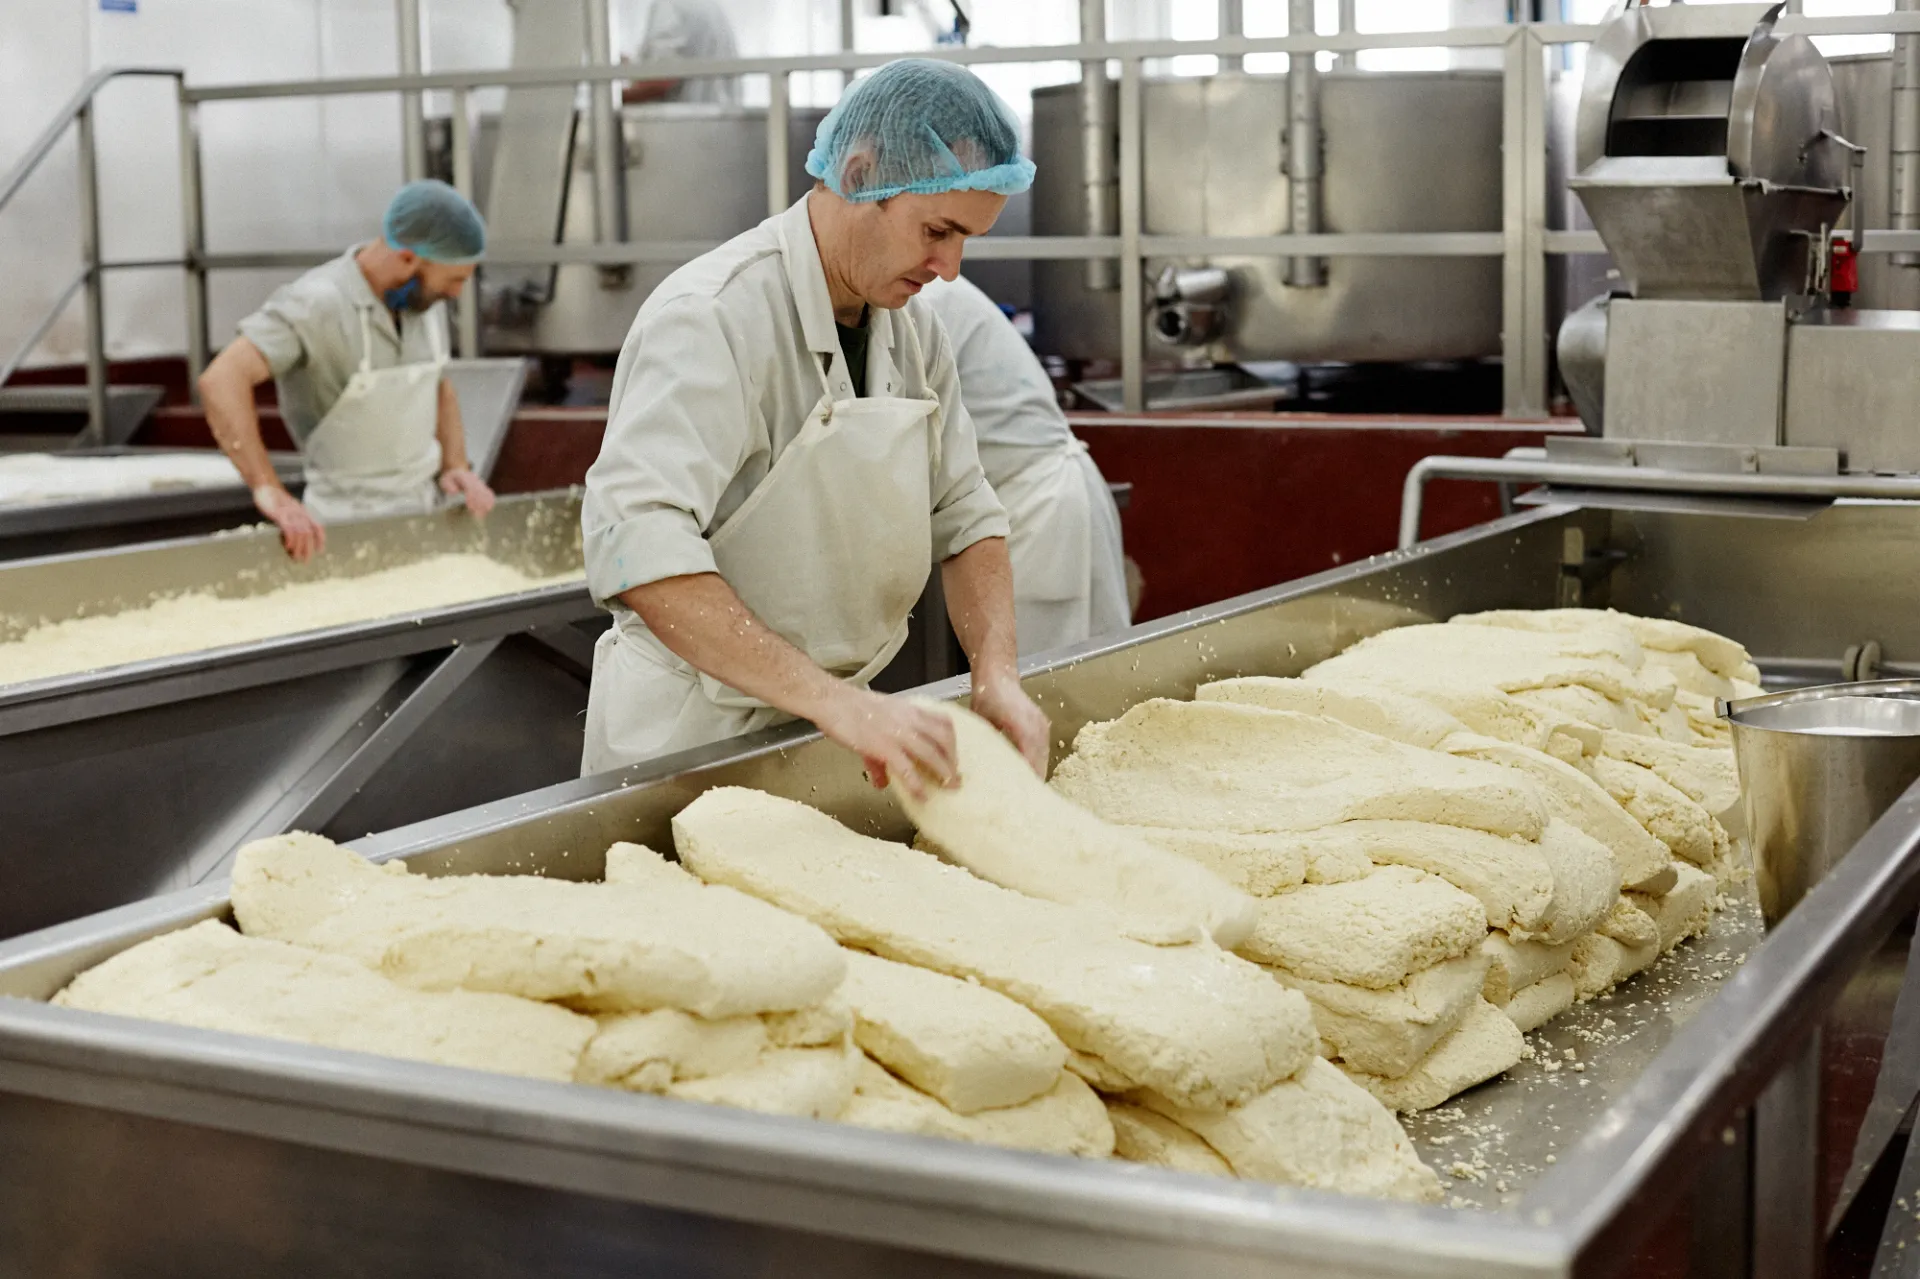 ‘Cheddaring’ – stacking and flipping blocks of curd – is done by hand at artisan producers such as Quicke’s. Credit: Matt Austin.